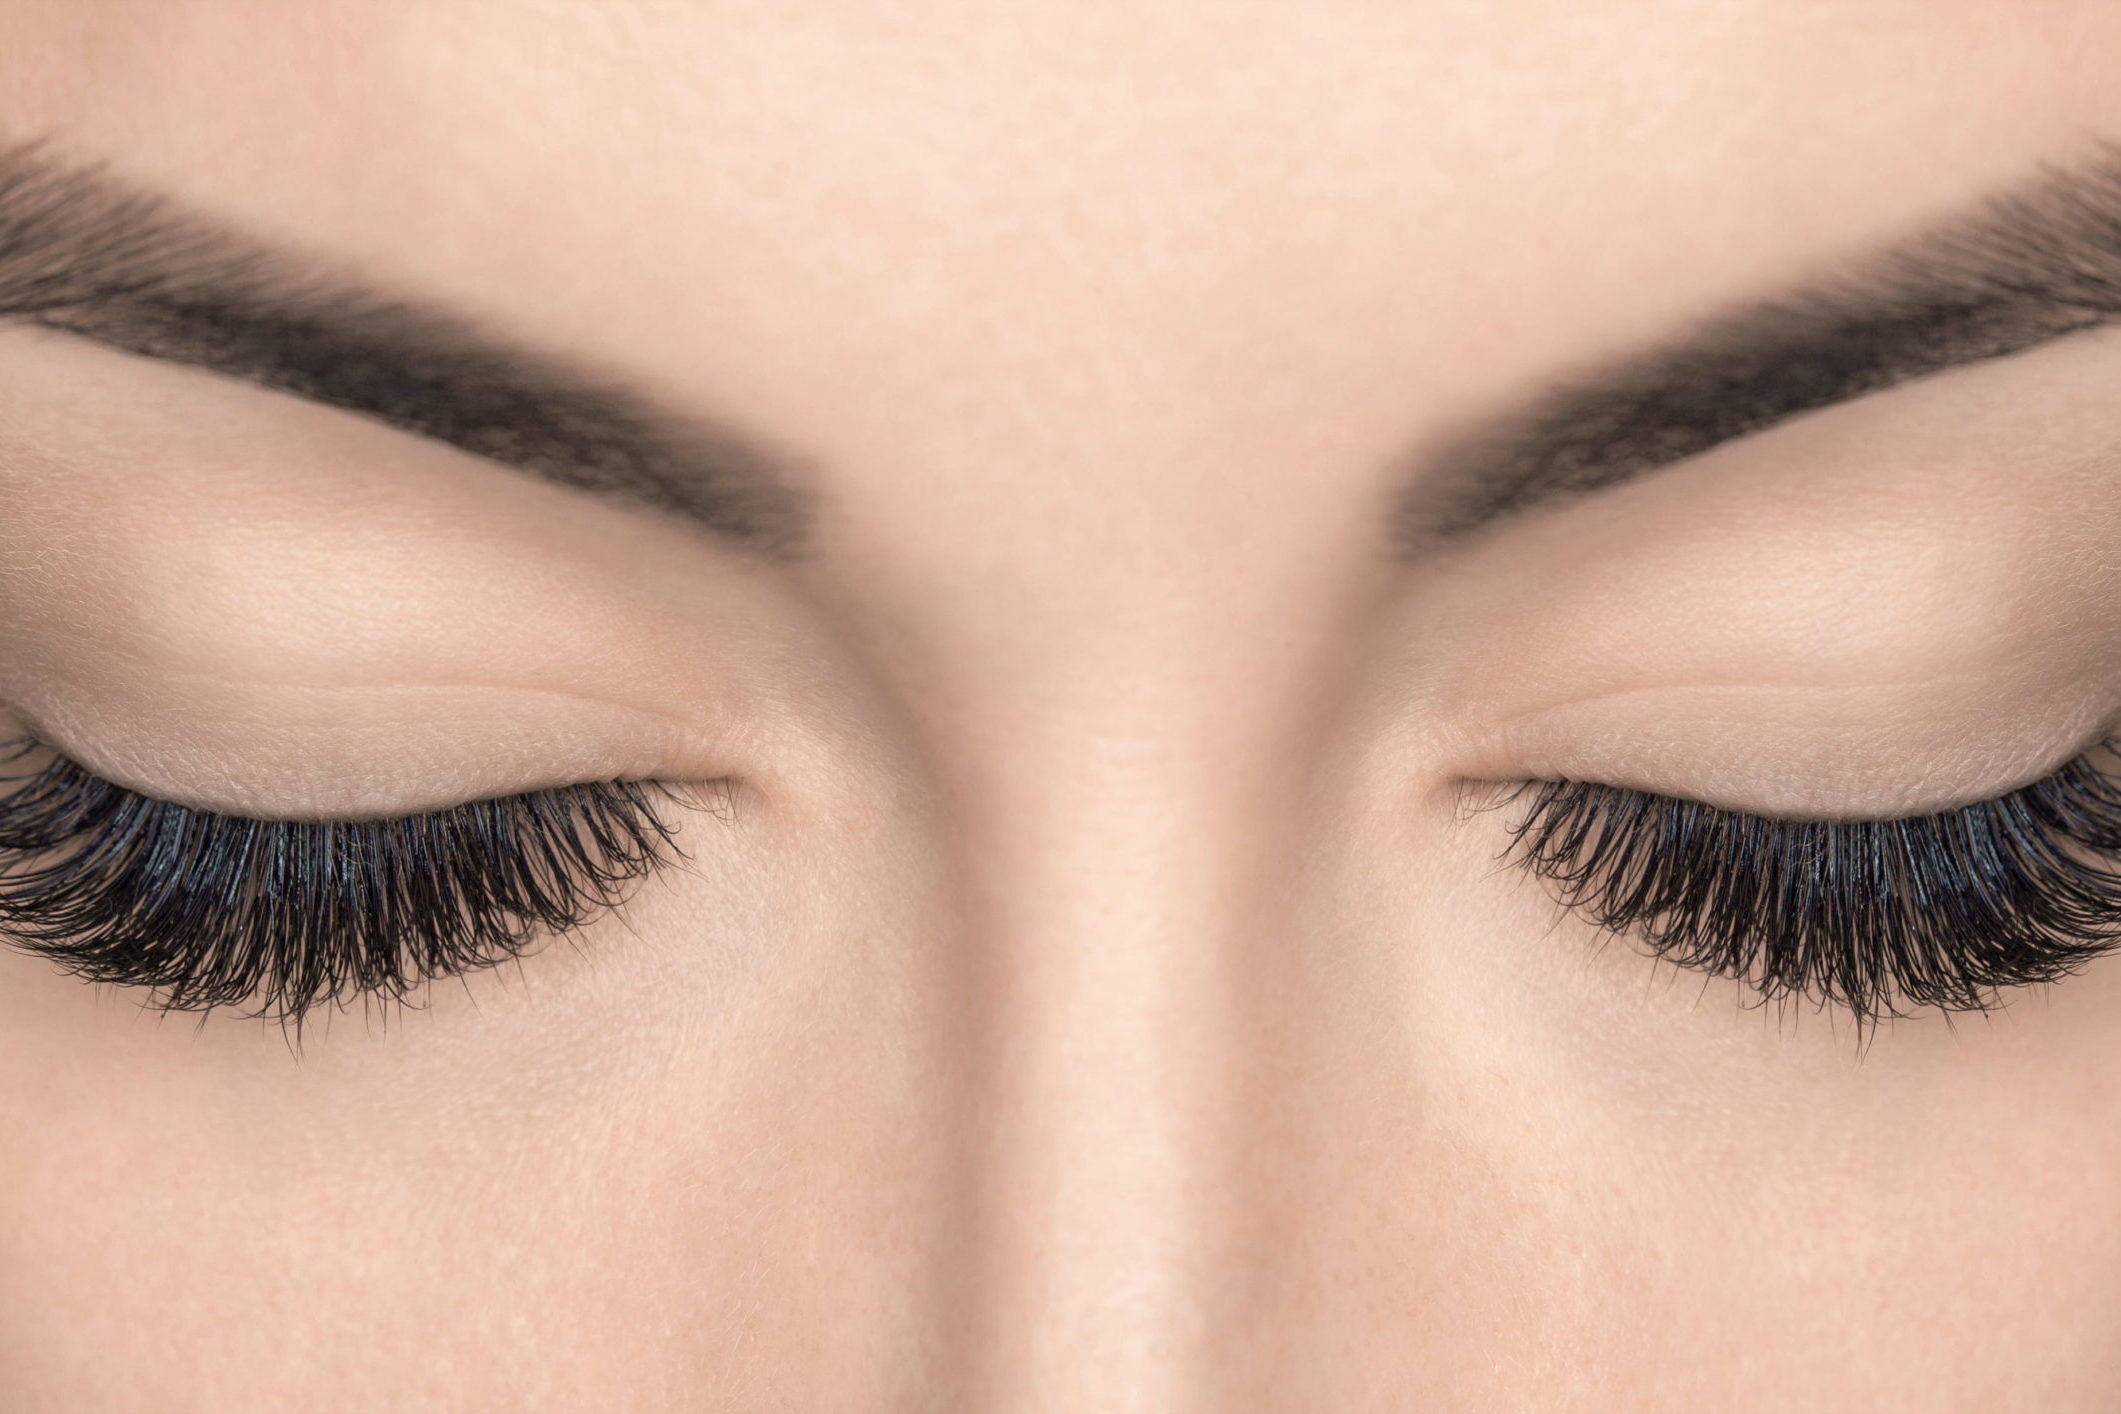 How a Brow Lift Can Make You Look Younger